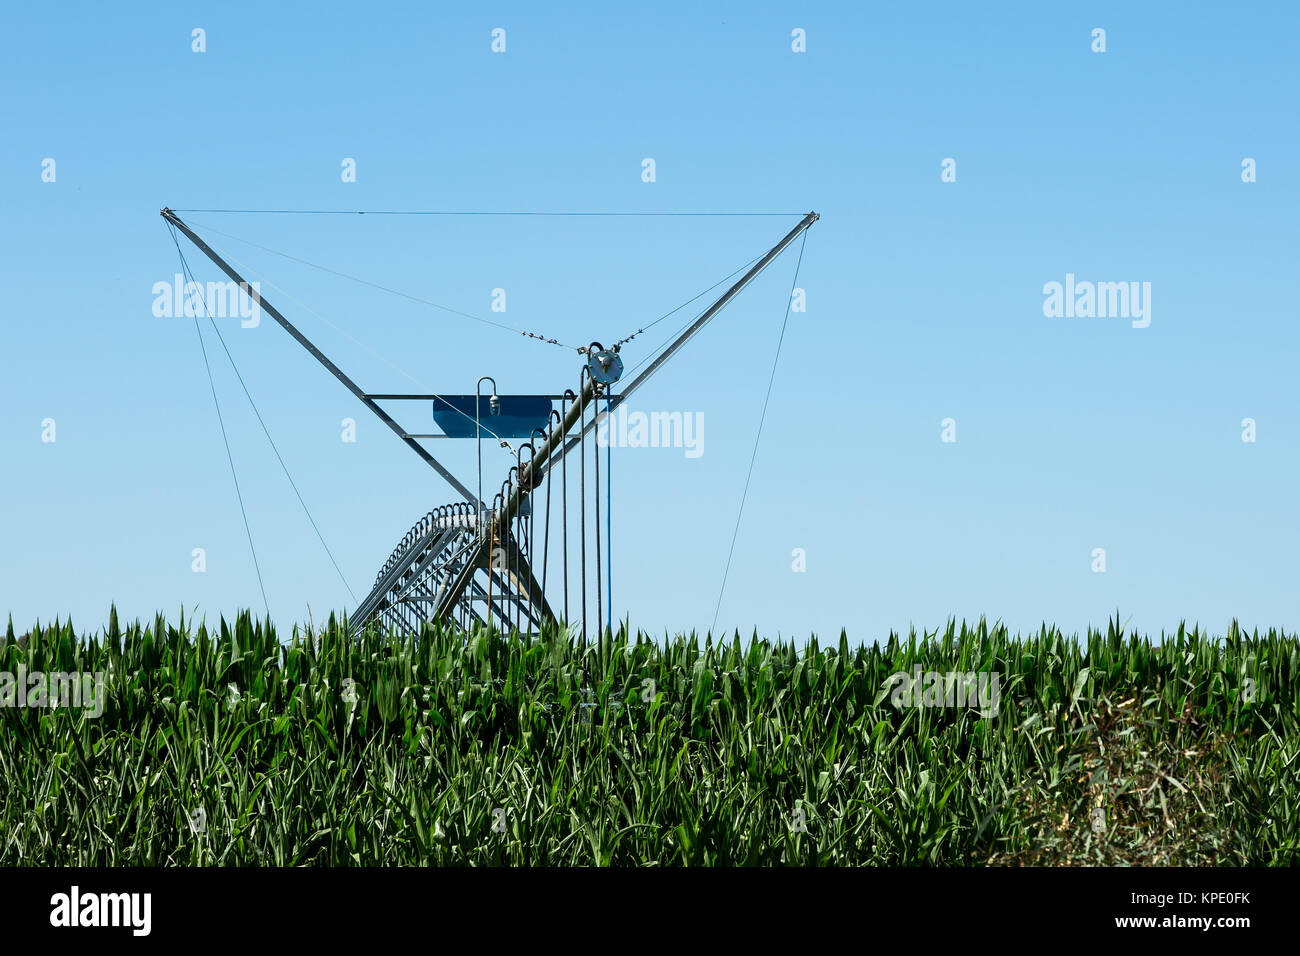 Large Lateral Move Irrigation System Stock Photo